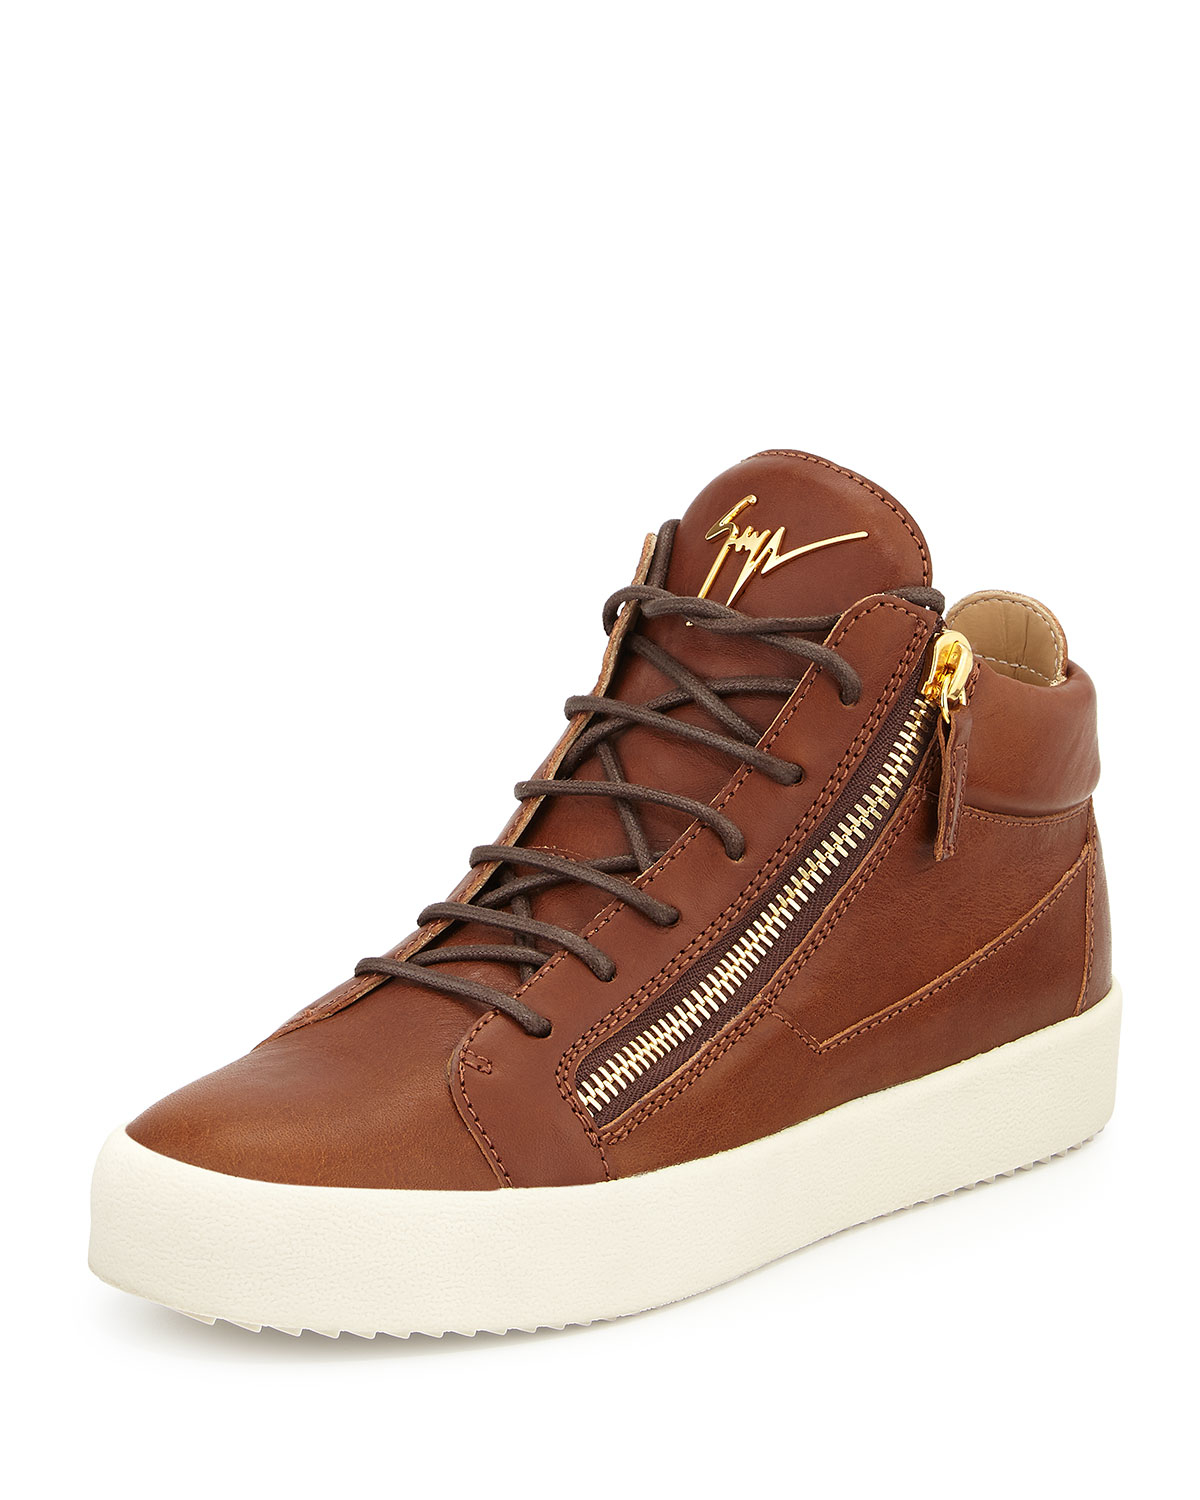 Lyst - Giuseppe Zanotti Leather Mid-Top Sneakers in Brown for Men